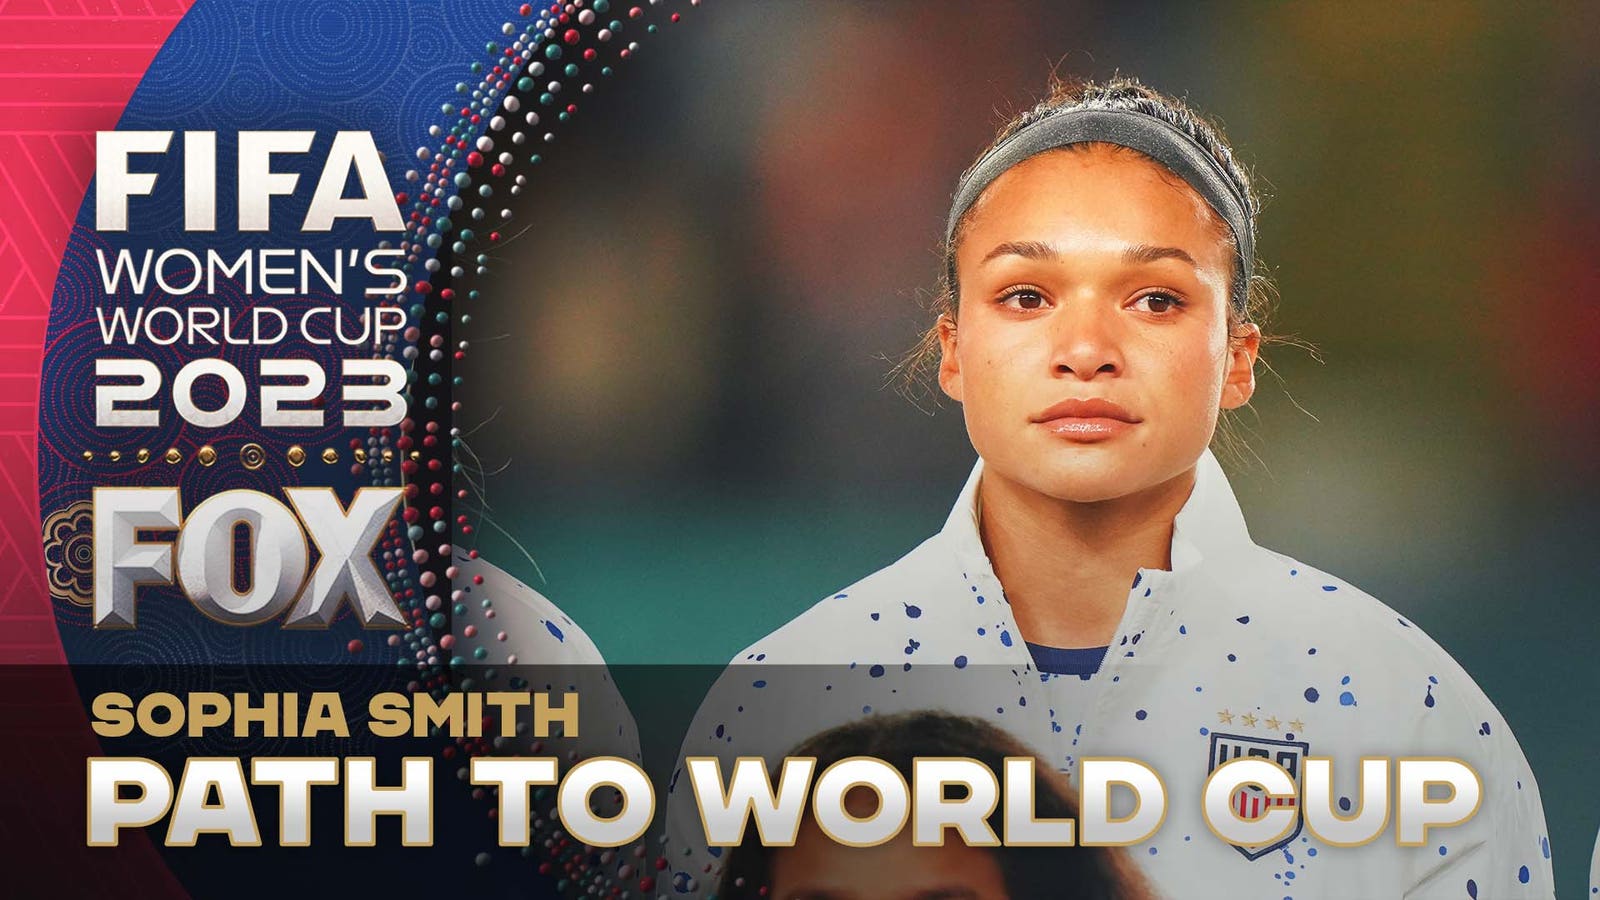 USA's Sophia Smith's path to the World Cup